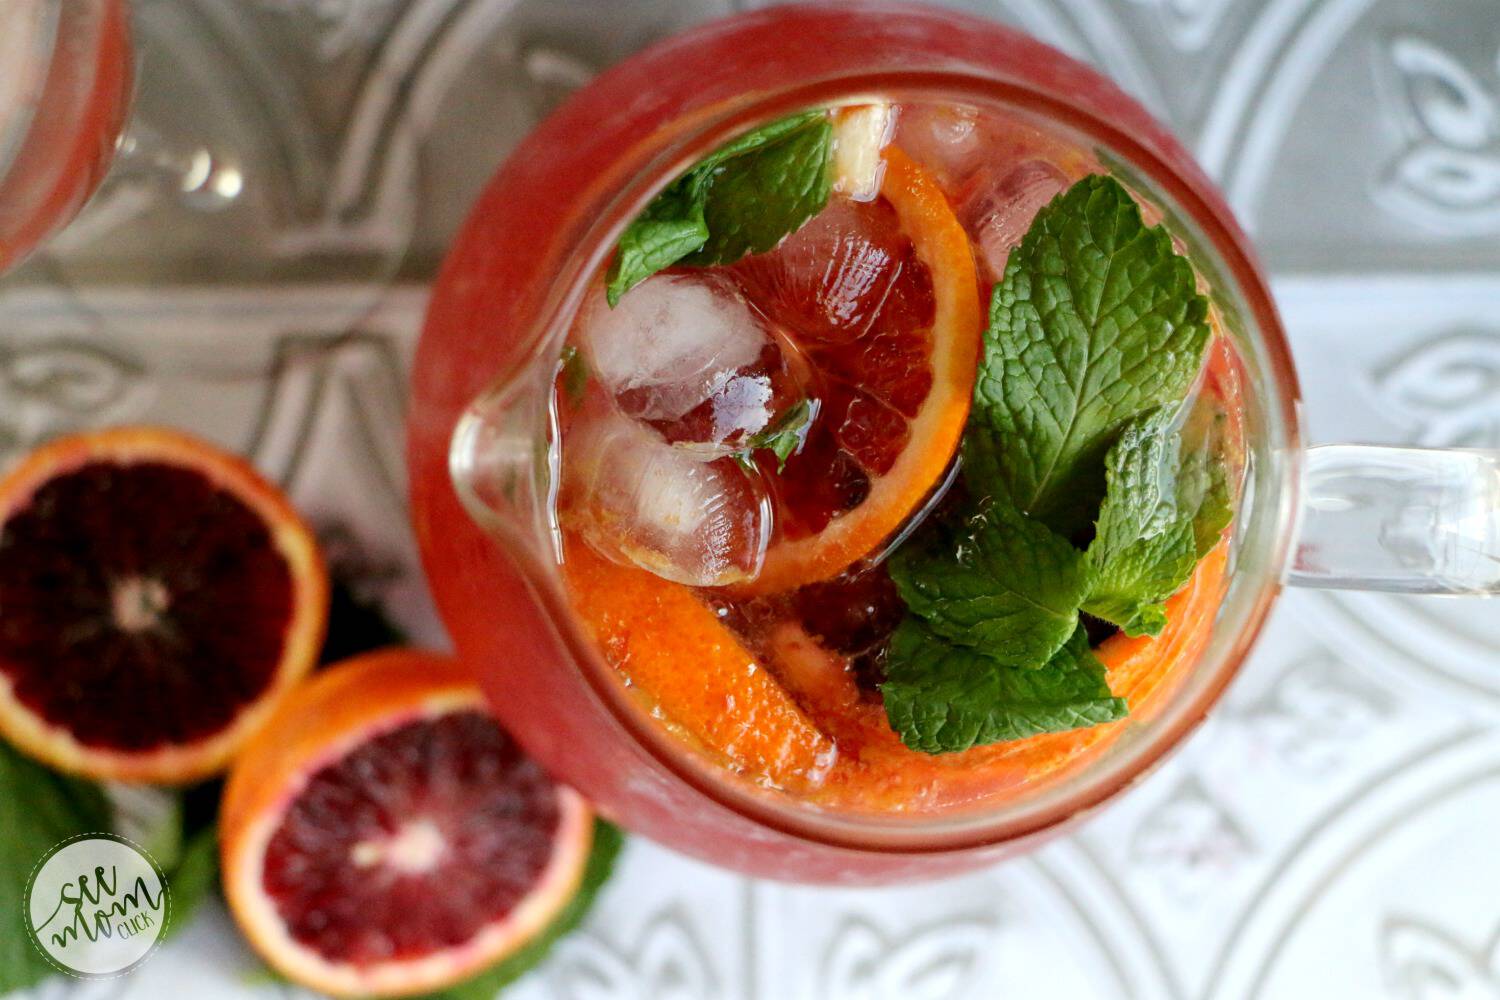 I have your new favorite blood orange cocktail right here! This Blood Orange Mimosa recipe is so easy to make and just delicious. It's perfect for party drinks or holiday celebrations. Cheers!